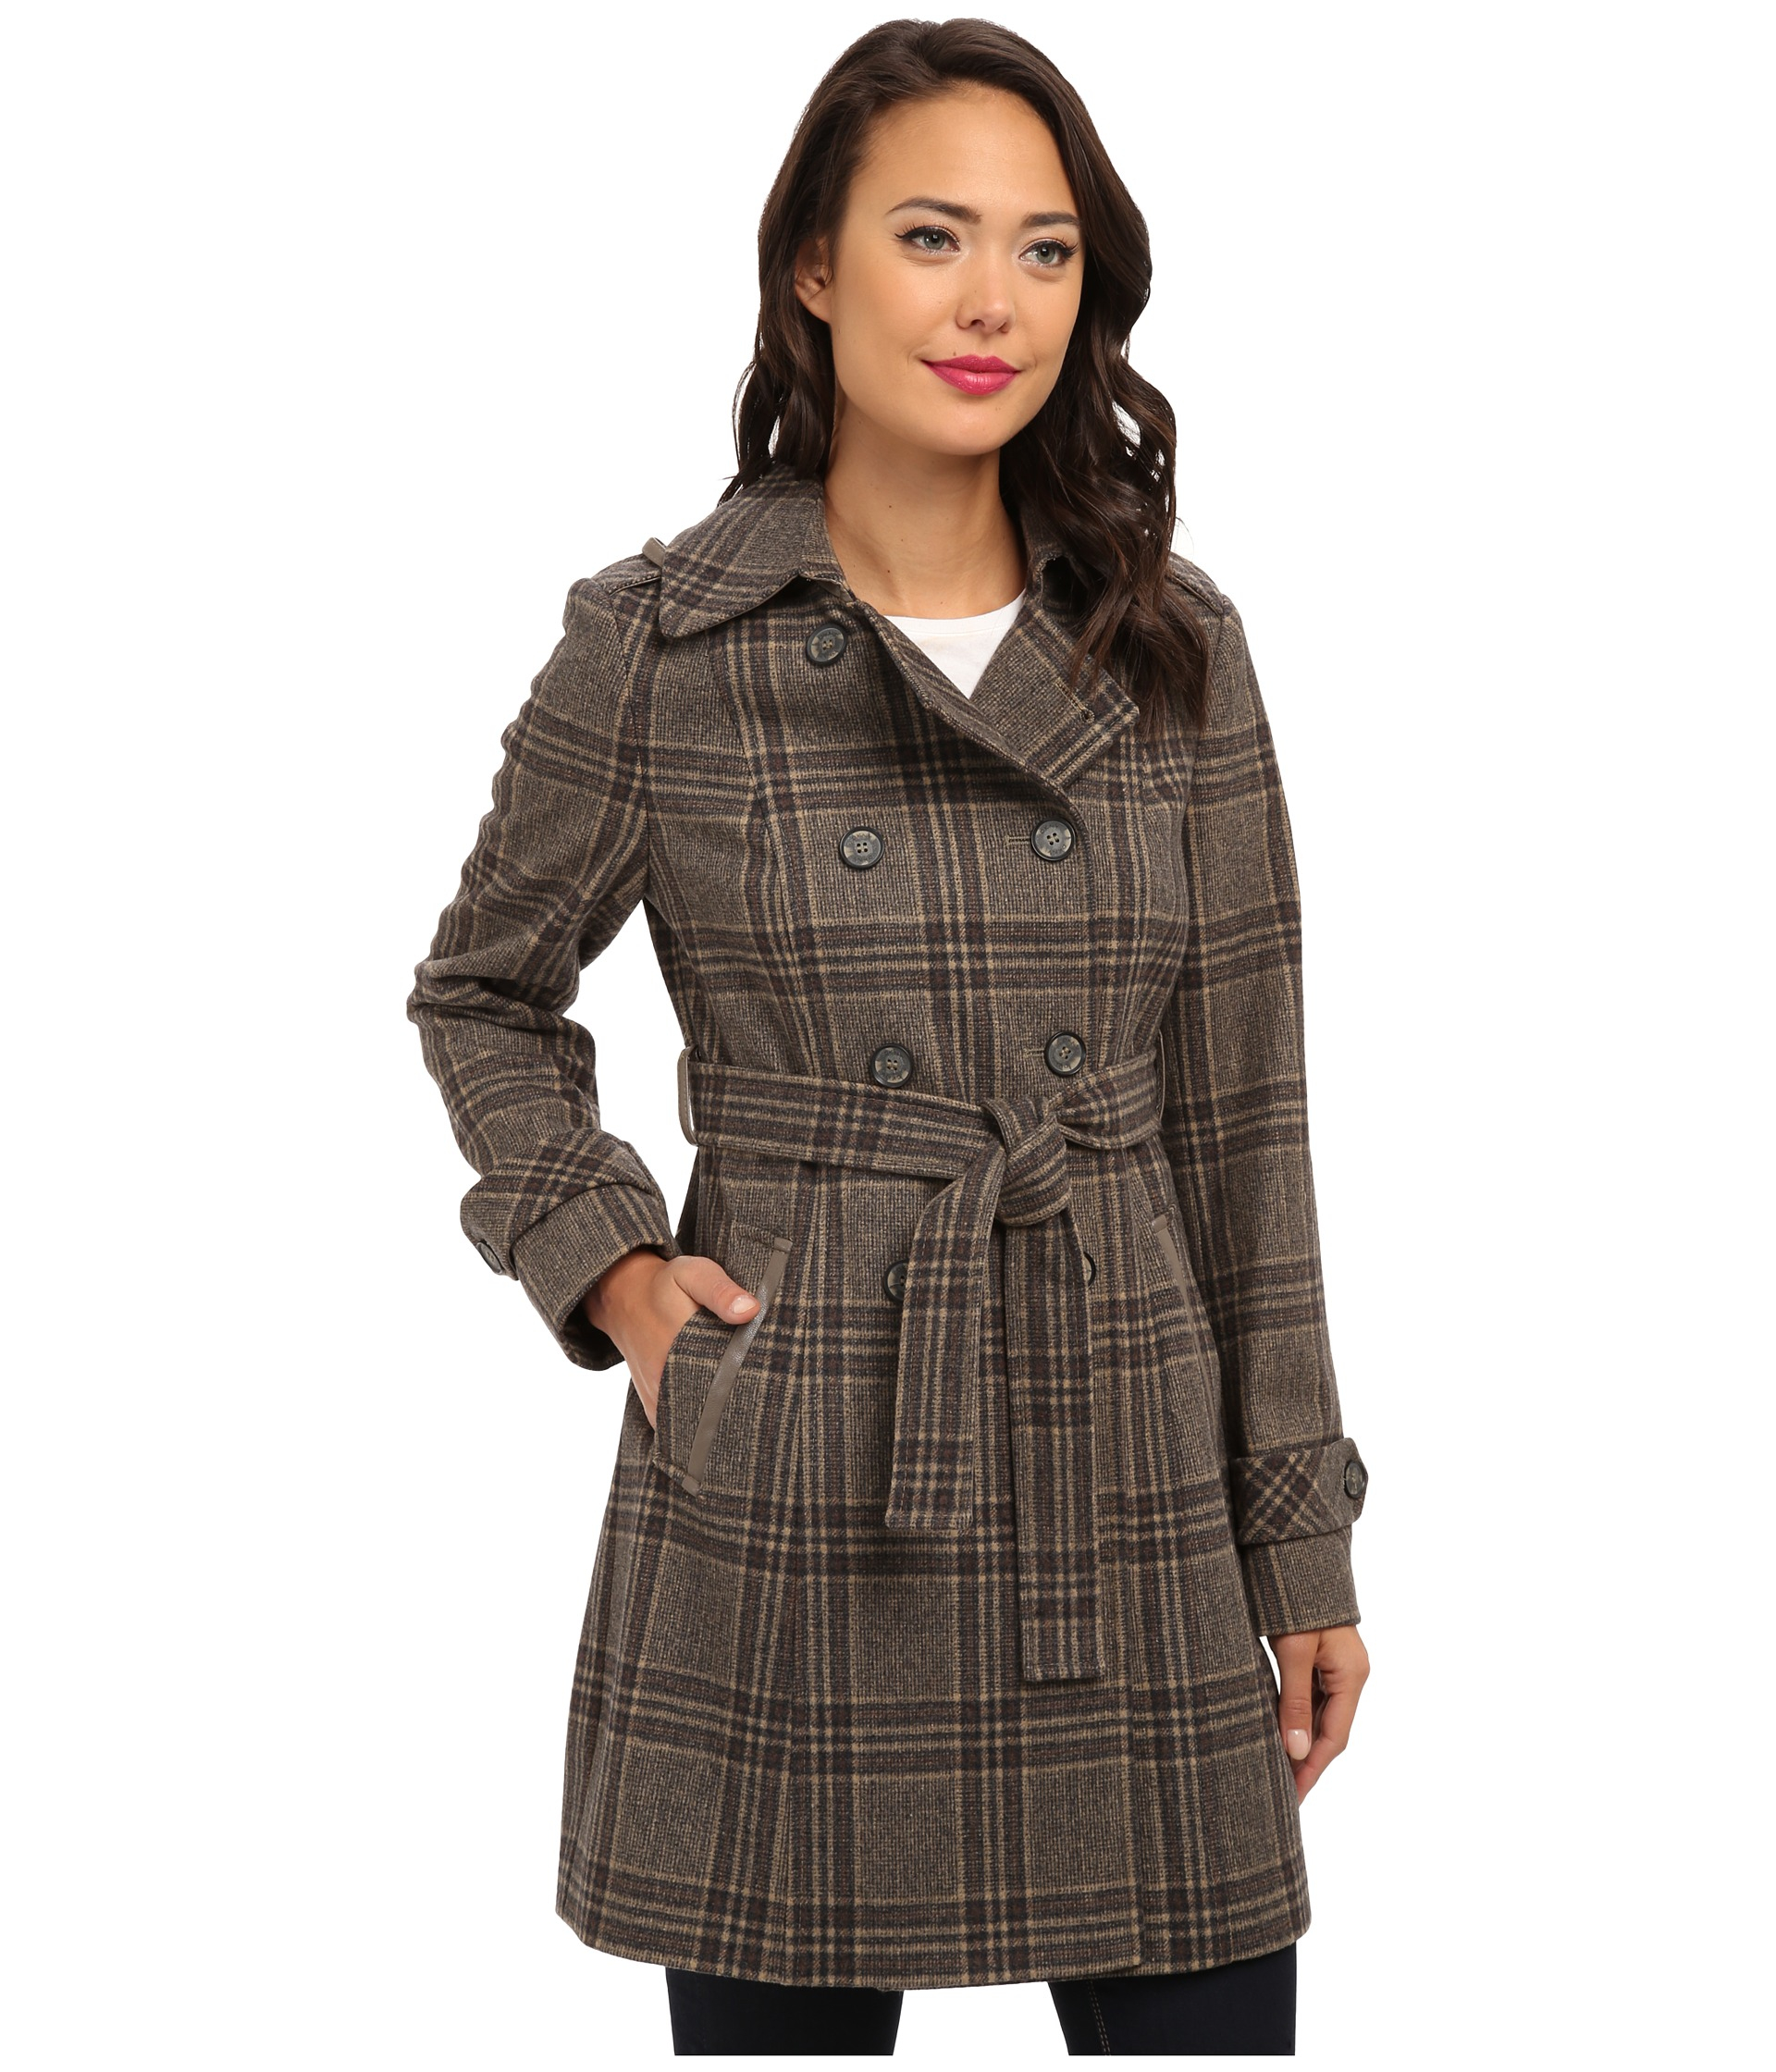 Lyst - Dkny Double Breasted Menswear Plaid Trench Coat 93809-y4 in Brown